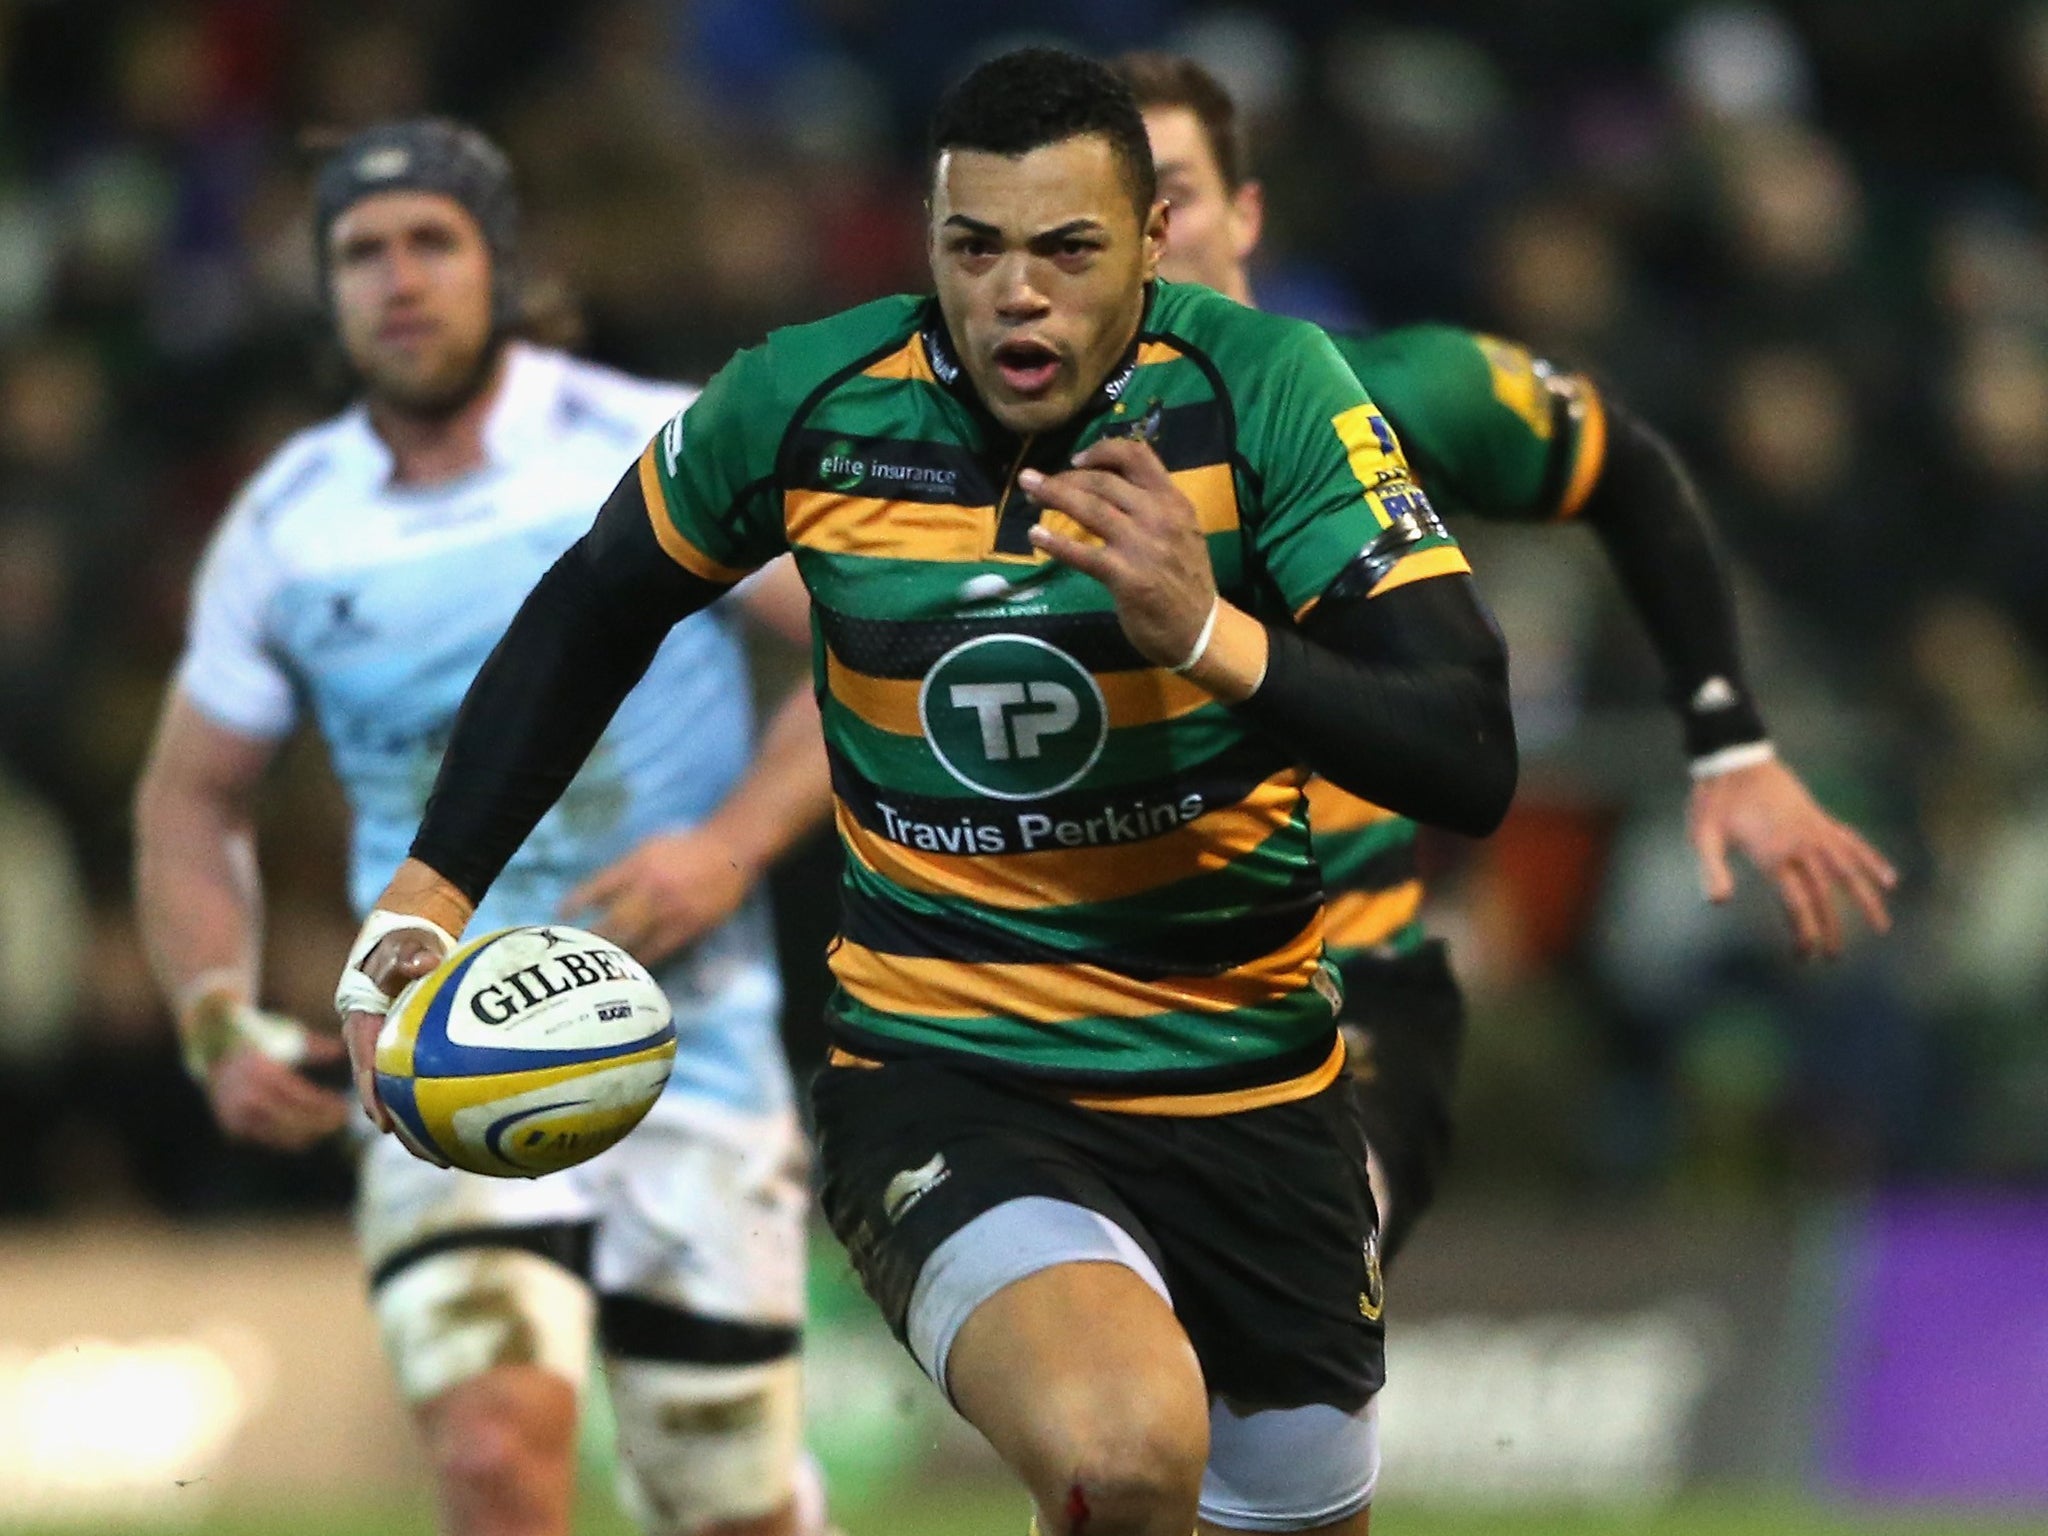 All eyes will be on Luther Burrell